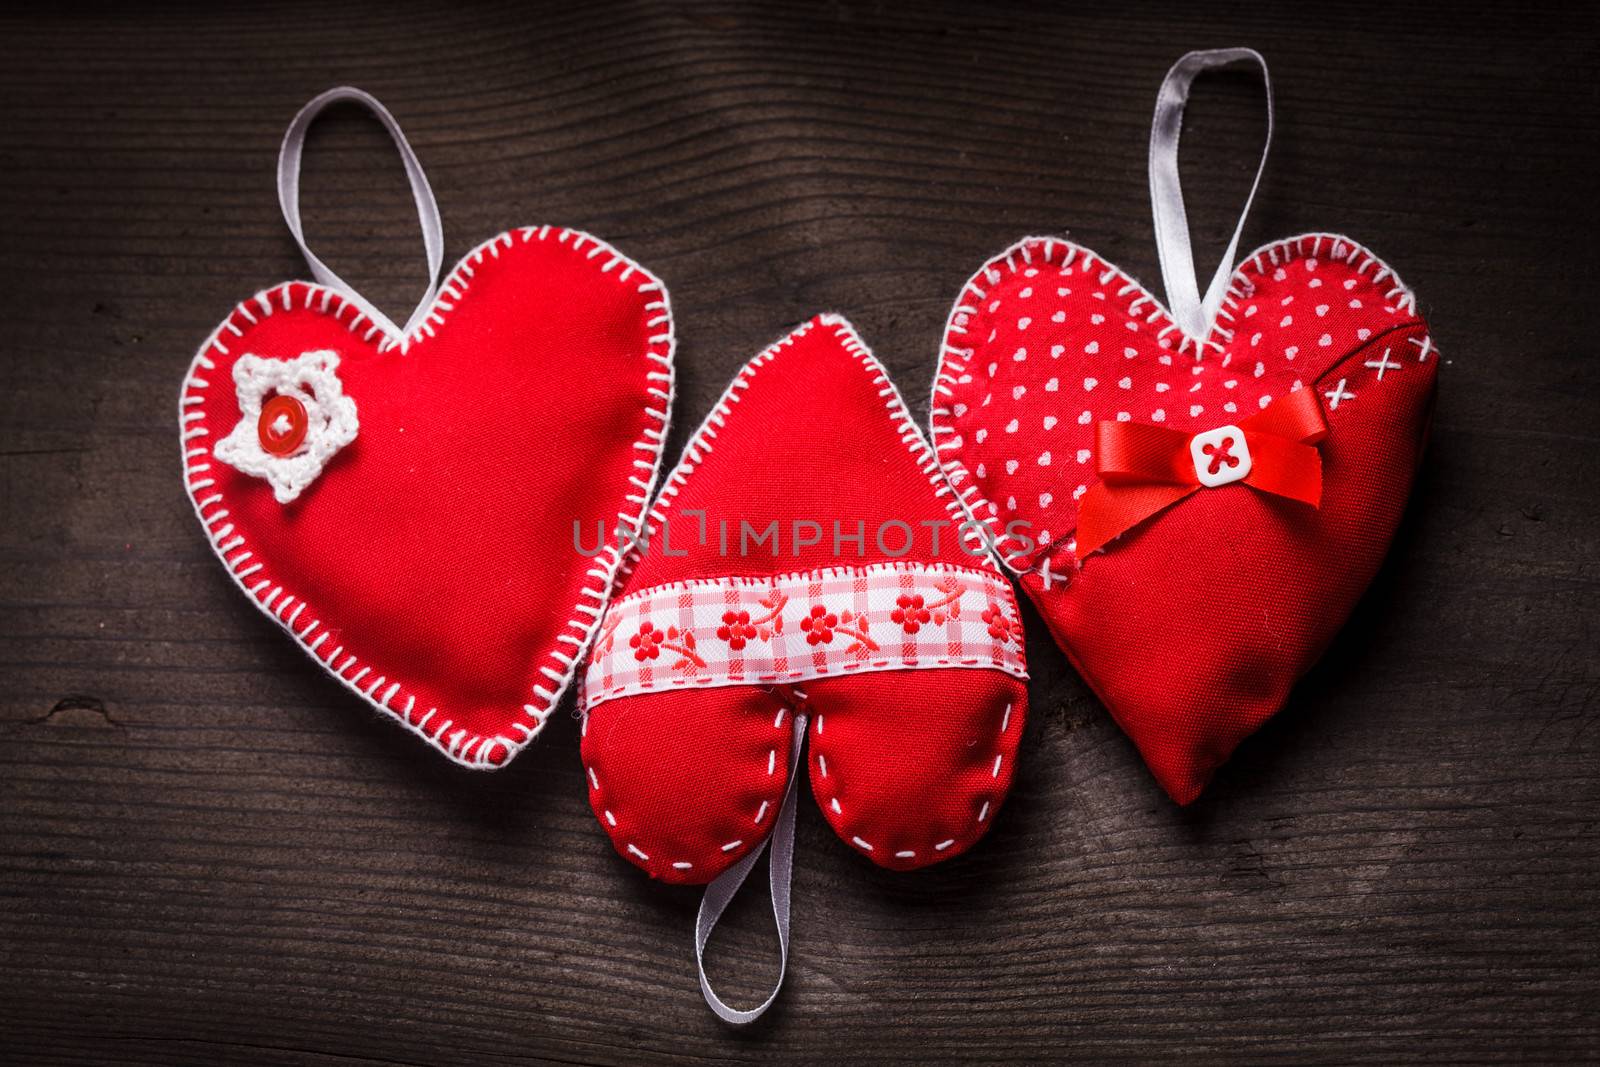 Sewed handmade red hearts on wooden background